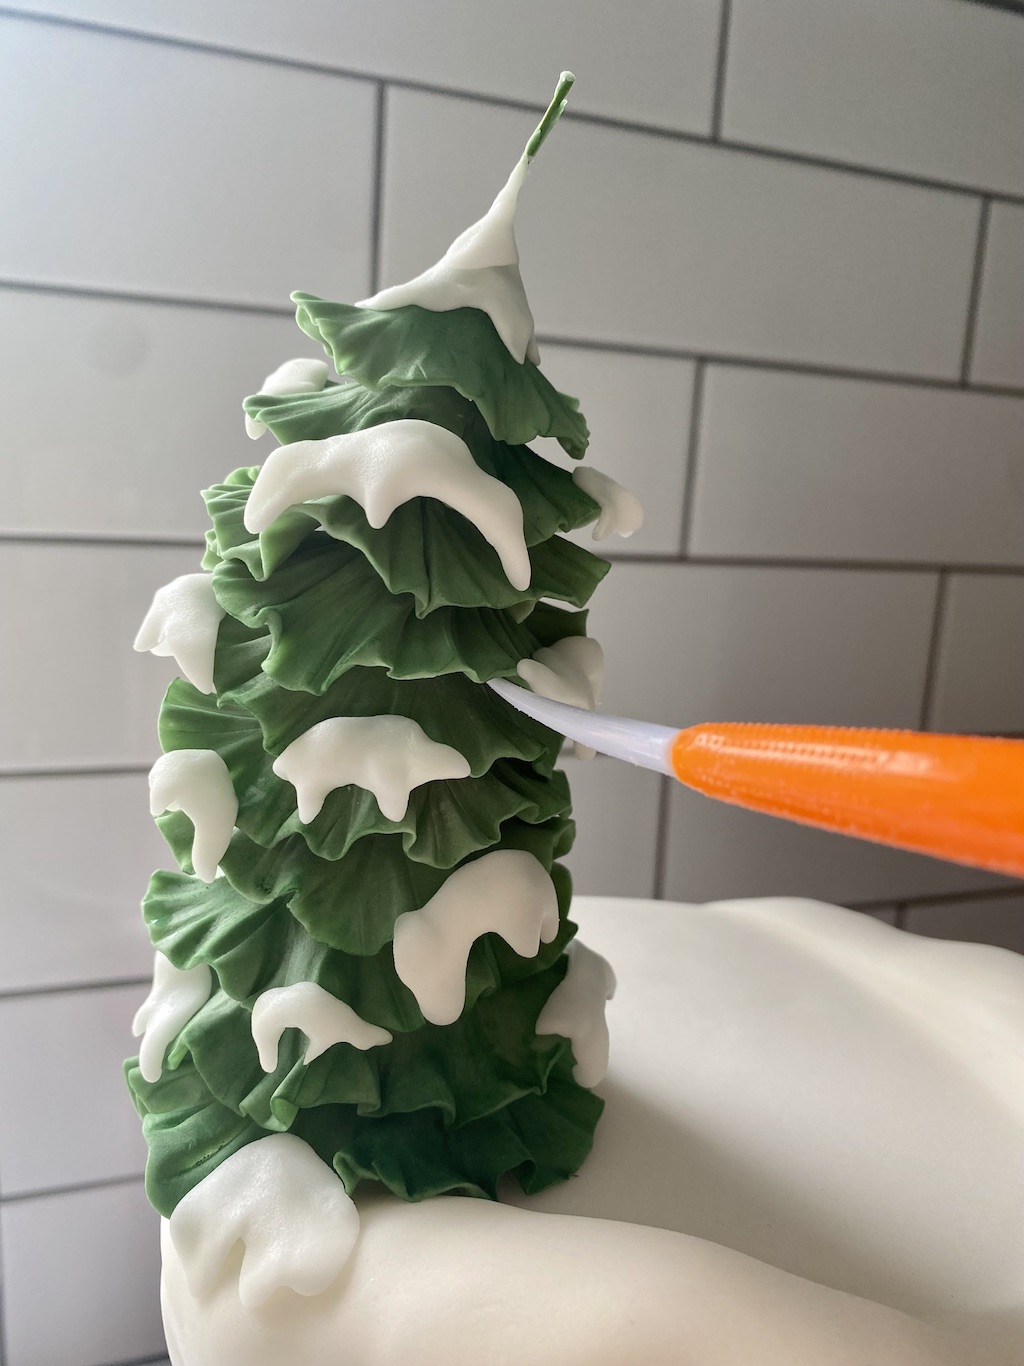 Sculpt a Christmas tree using modelling paste